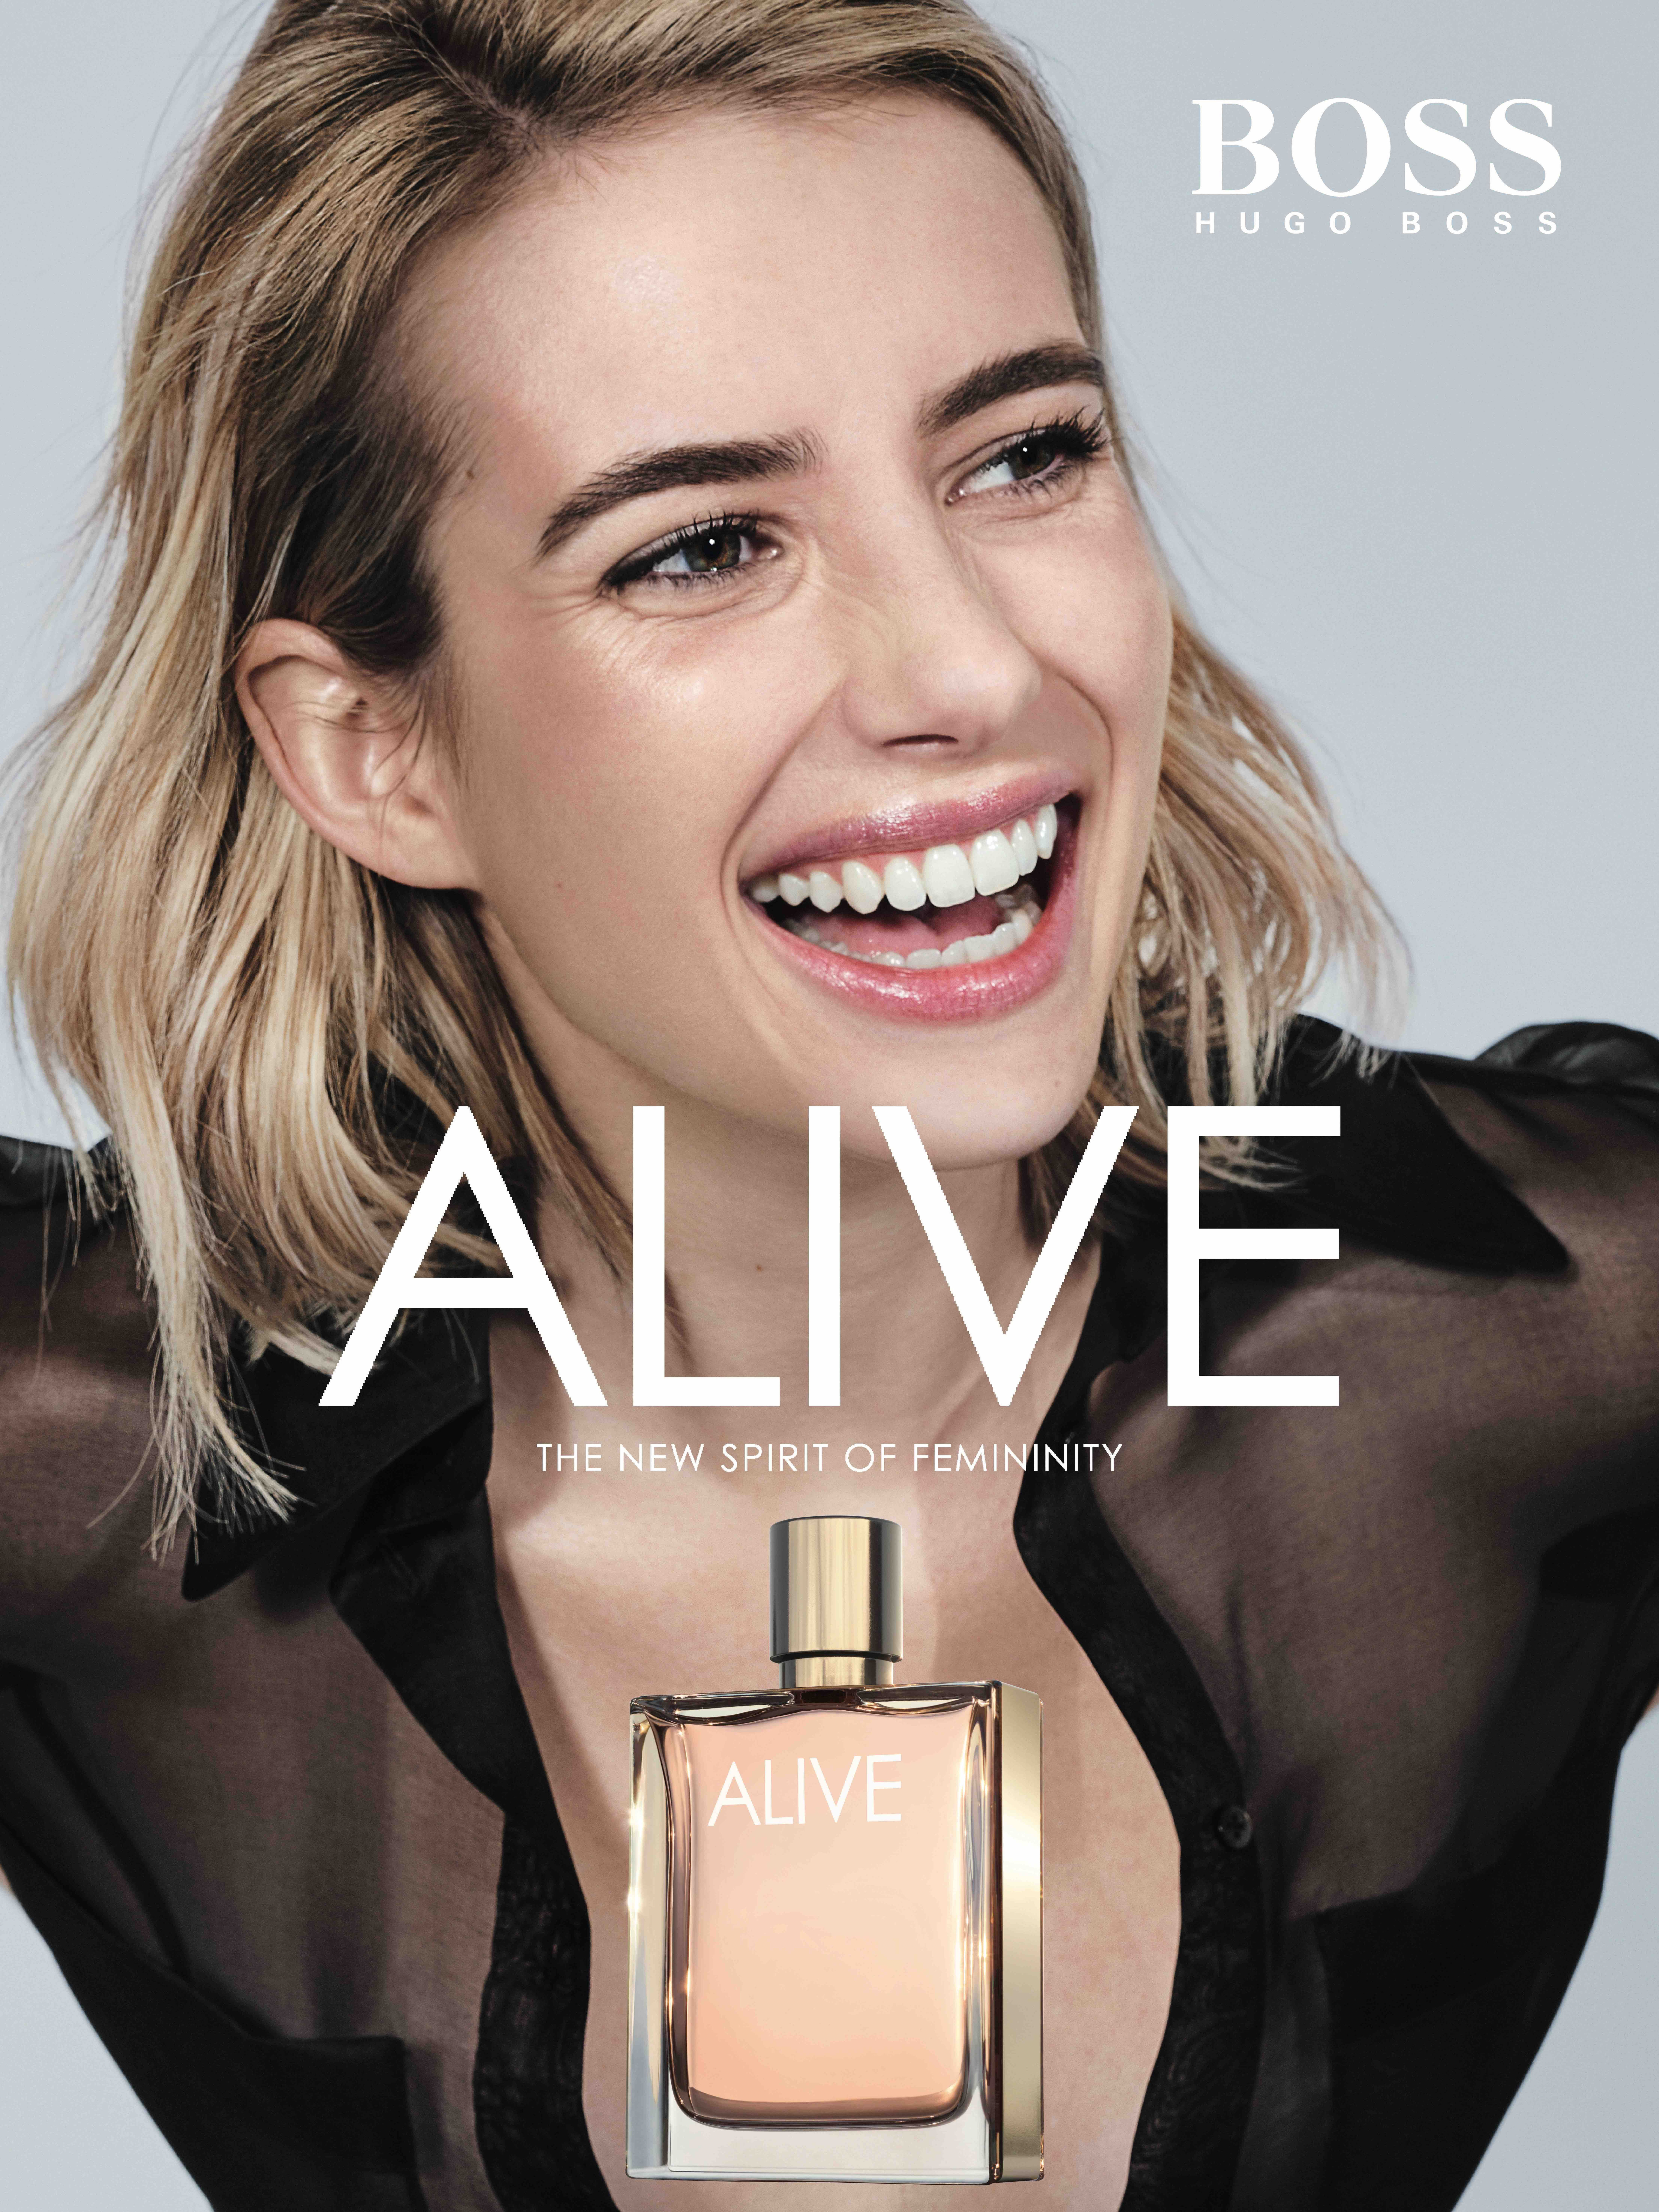 Boss Alive Emma Roberts Laura Harrier – Boss Brings New Women's Fragrance  to Life with All-Female Campaign